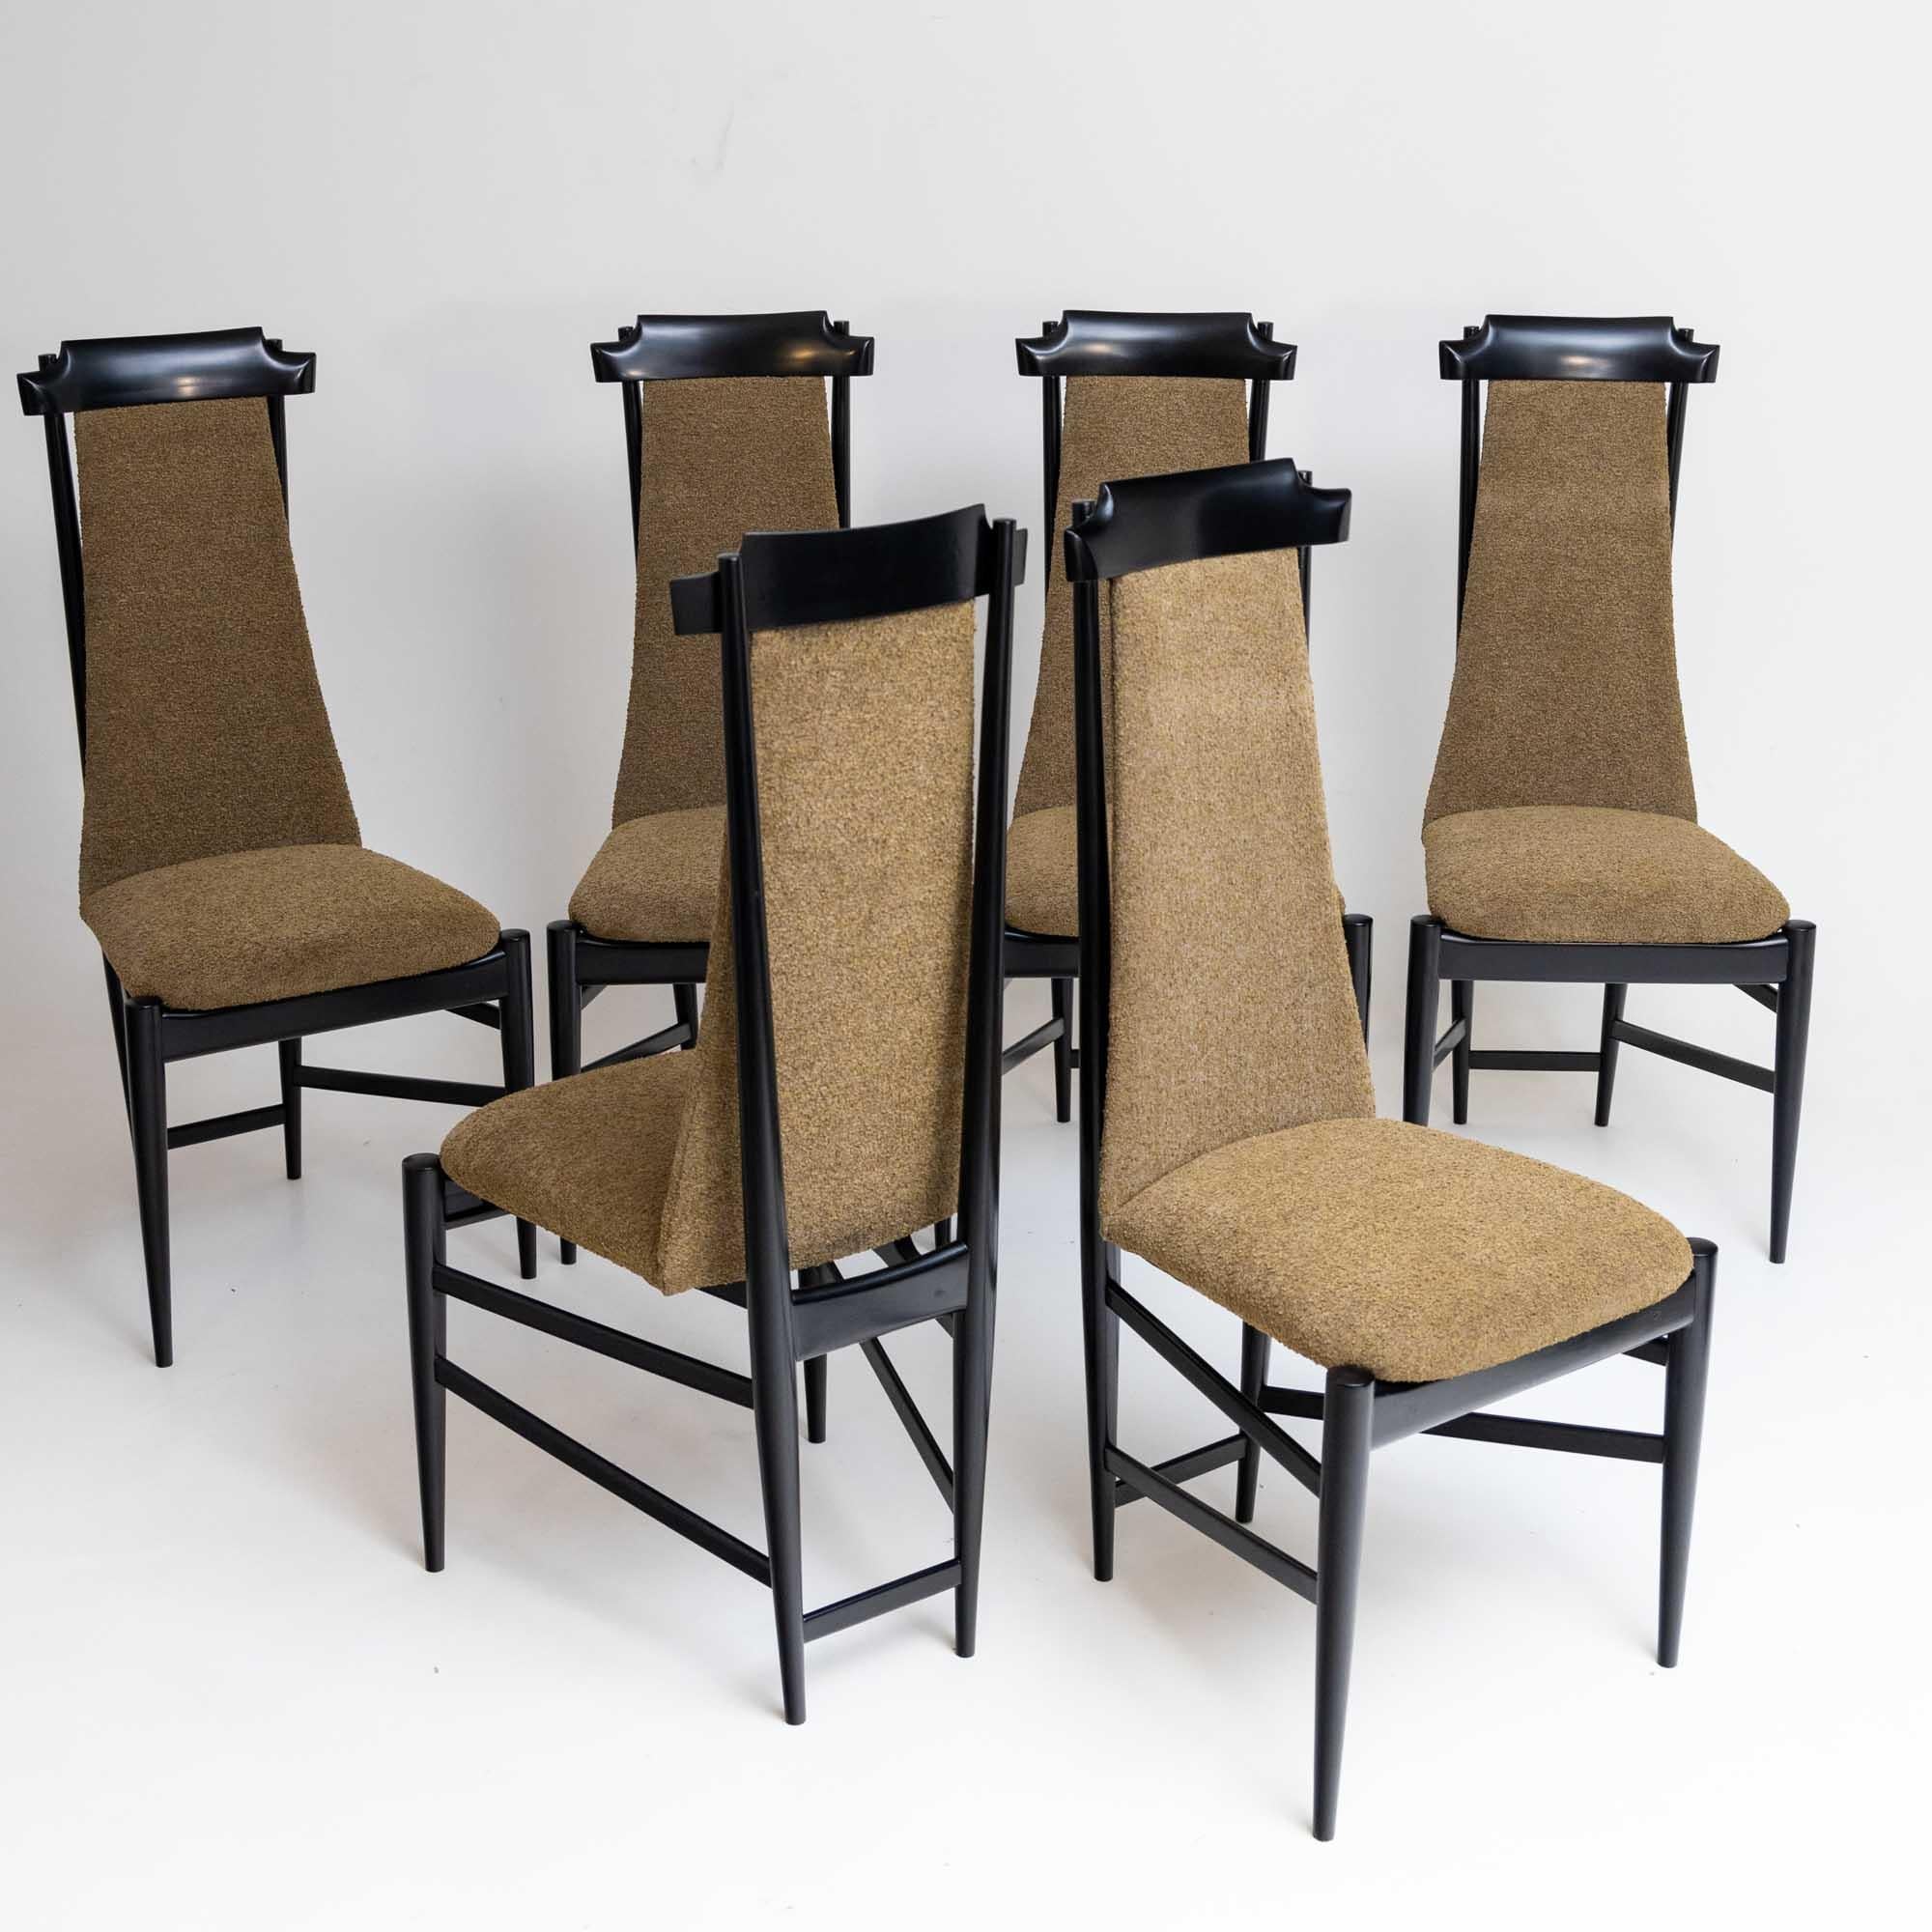 Six chairs by Sergio Rodrigues (Brazil, 1927-2014), Italy 1960s In Excellent Condition For Sale In Greding, DE